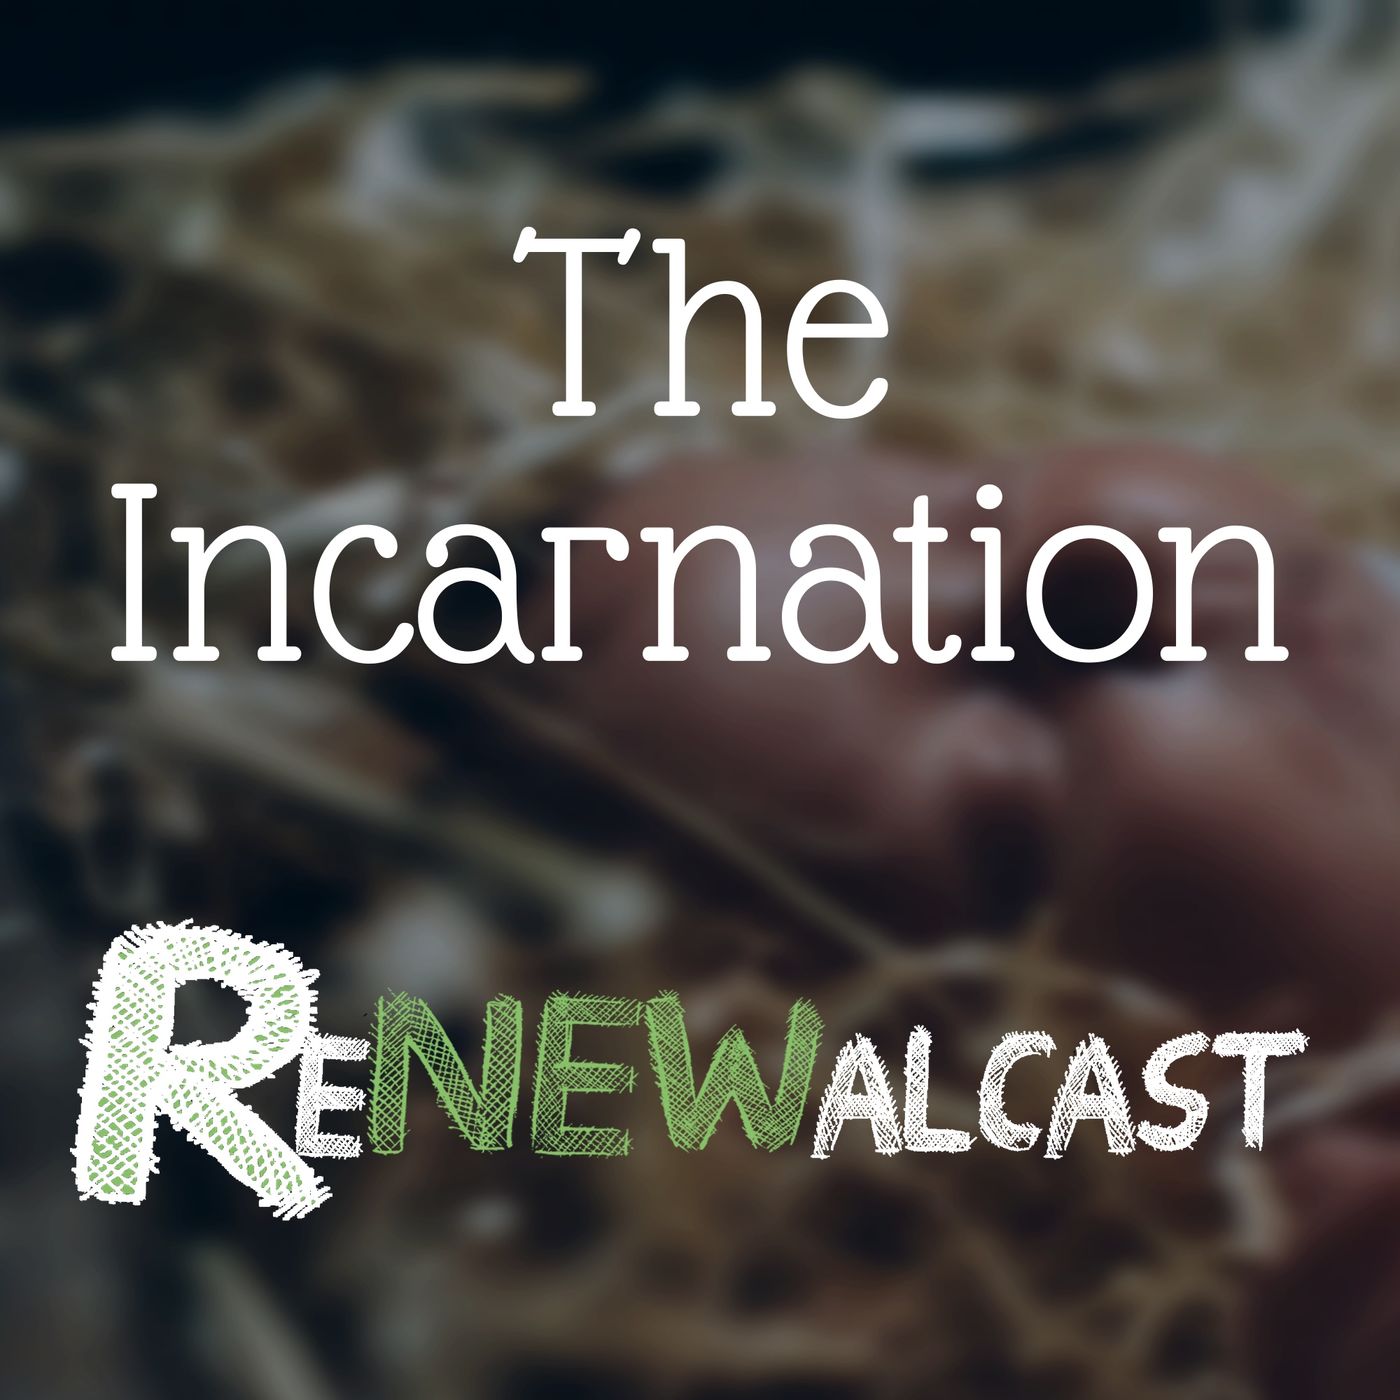 The Doctrine of the Incarnation